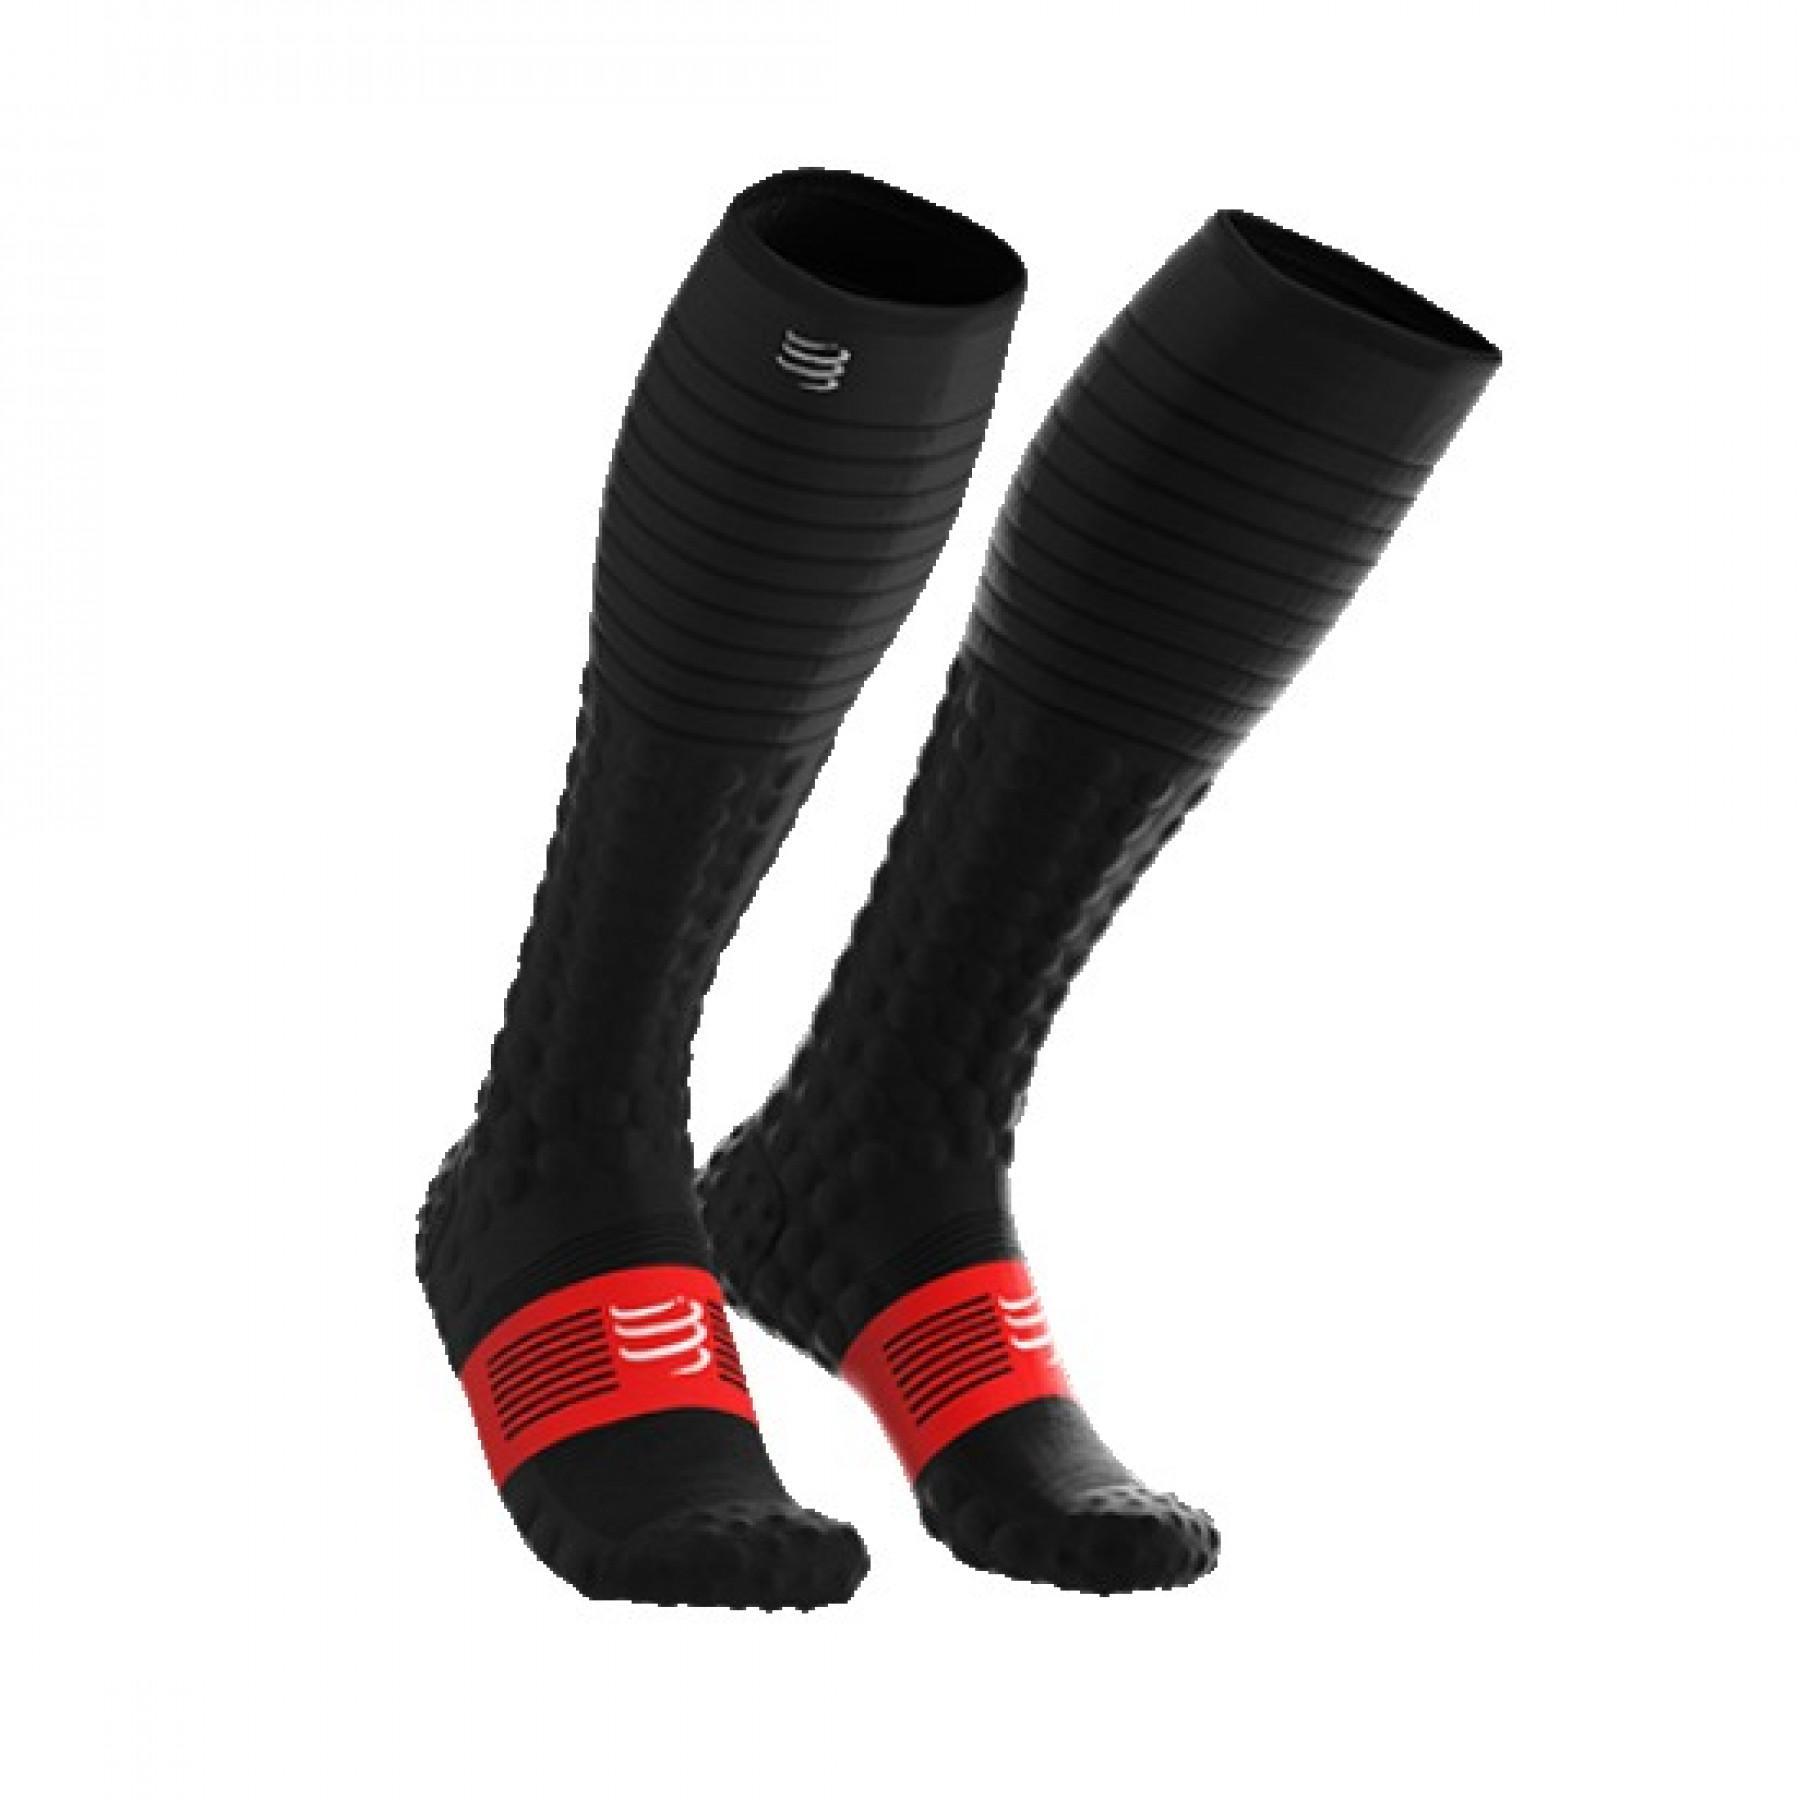 Chaussettes hautes Compressport full recovery